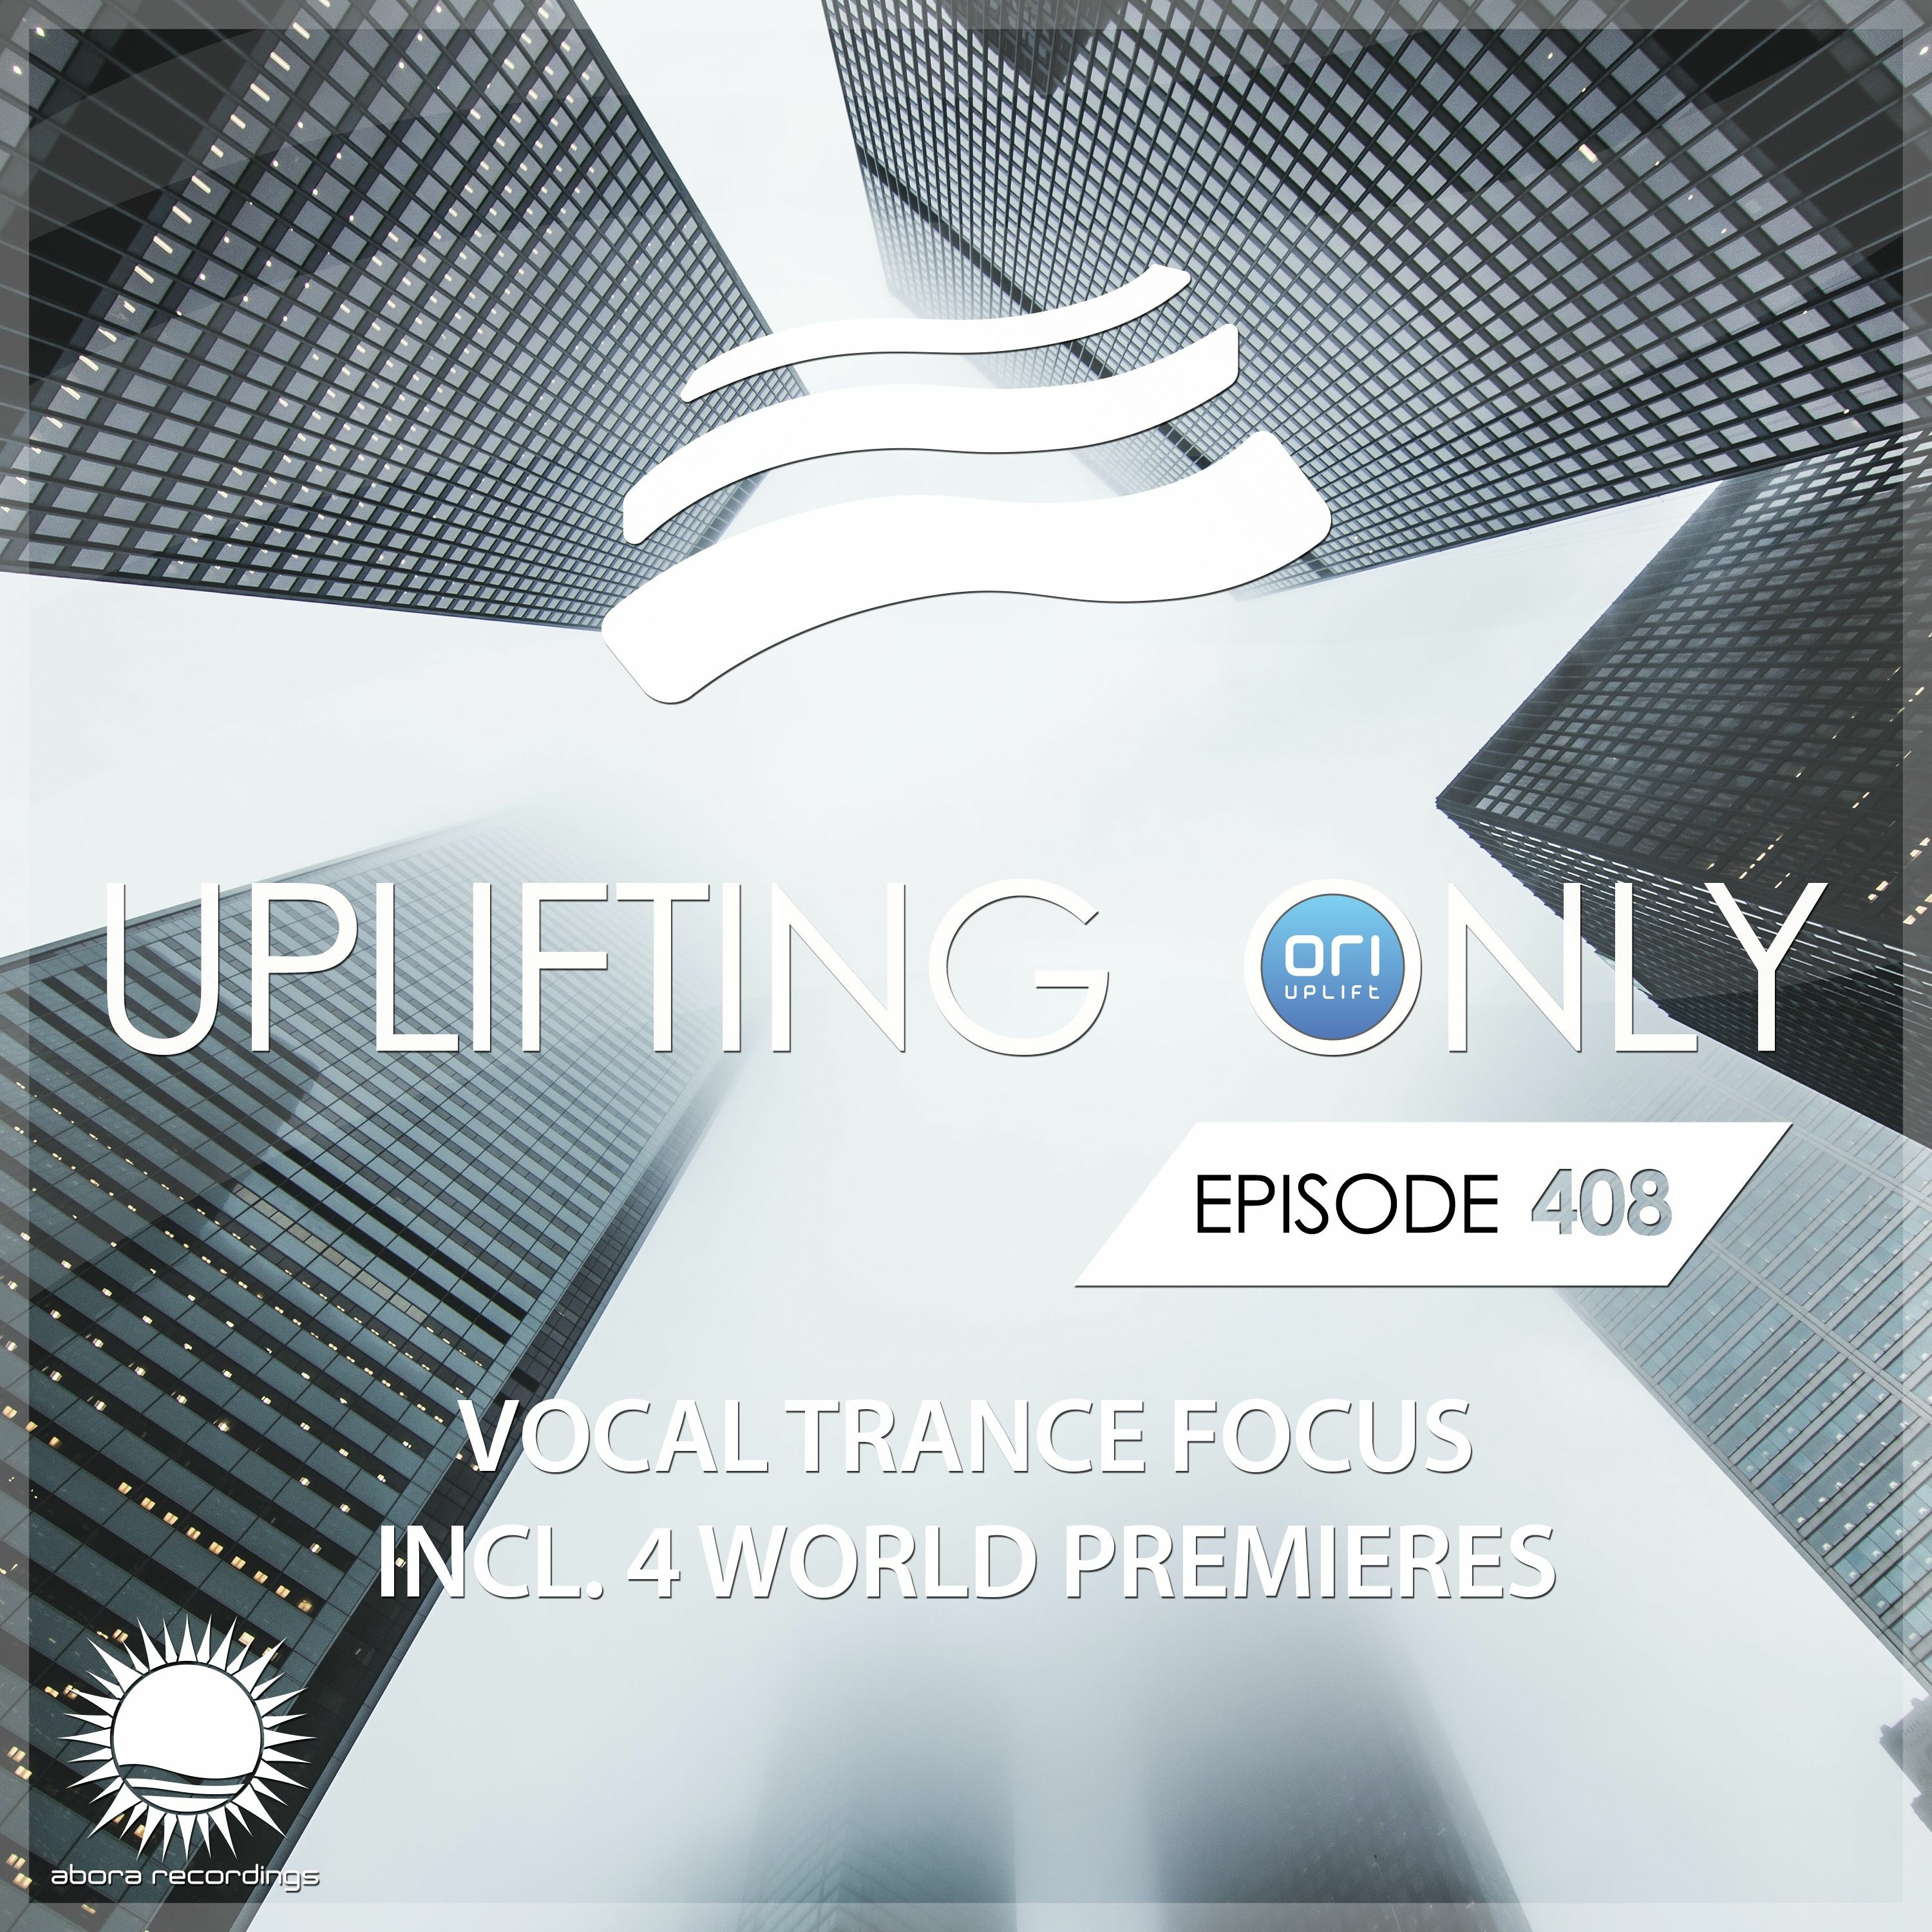 Uplifting Only 408 (Dec 3, 2020) (Vocal Trance Focus)